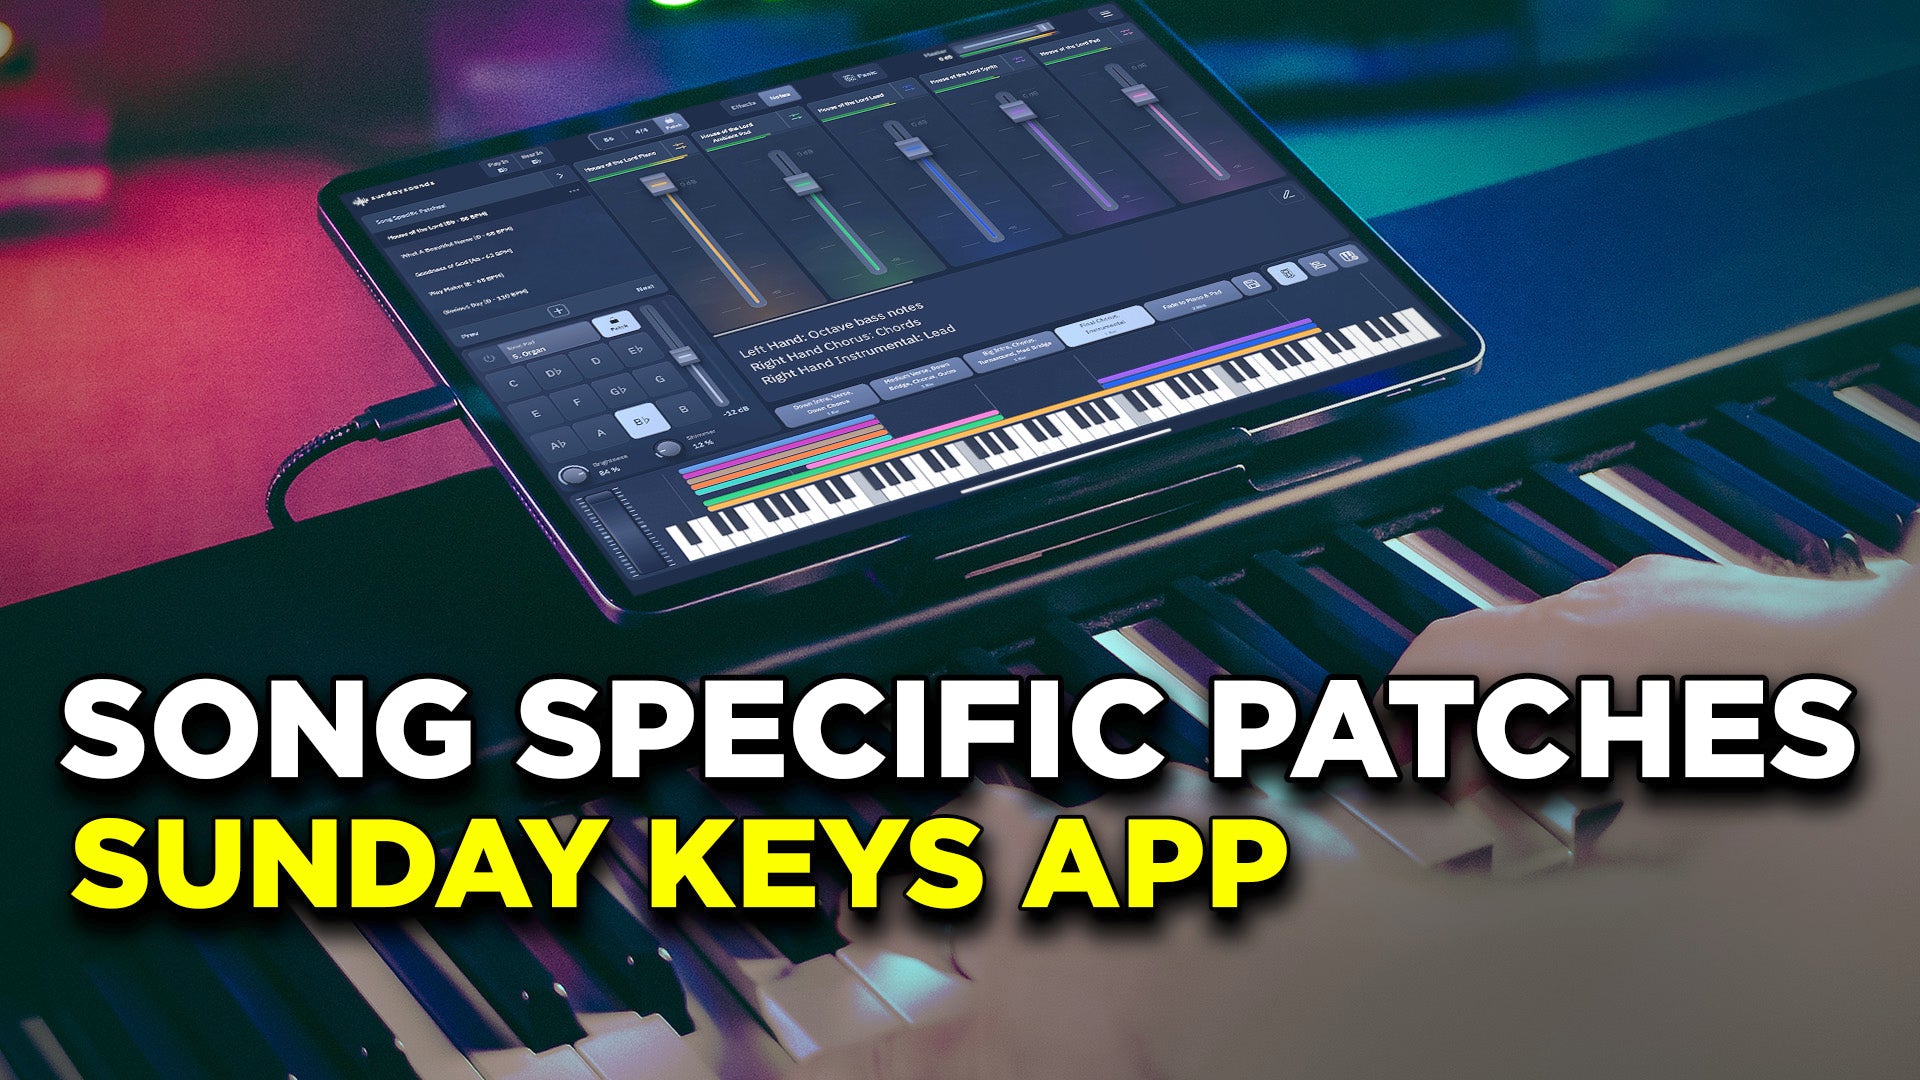 Song Specific Patches in the Sunday Keys App!